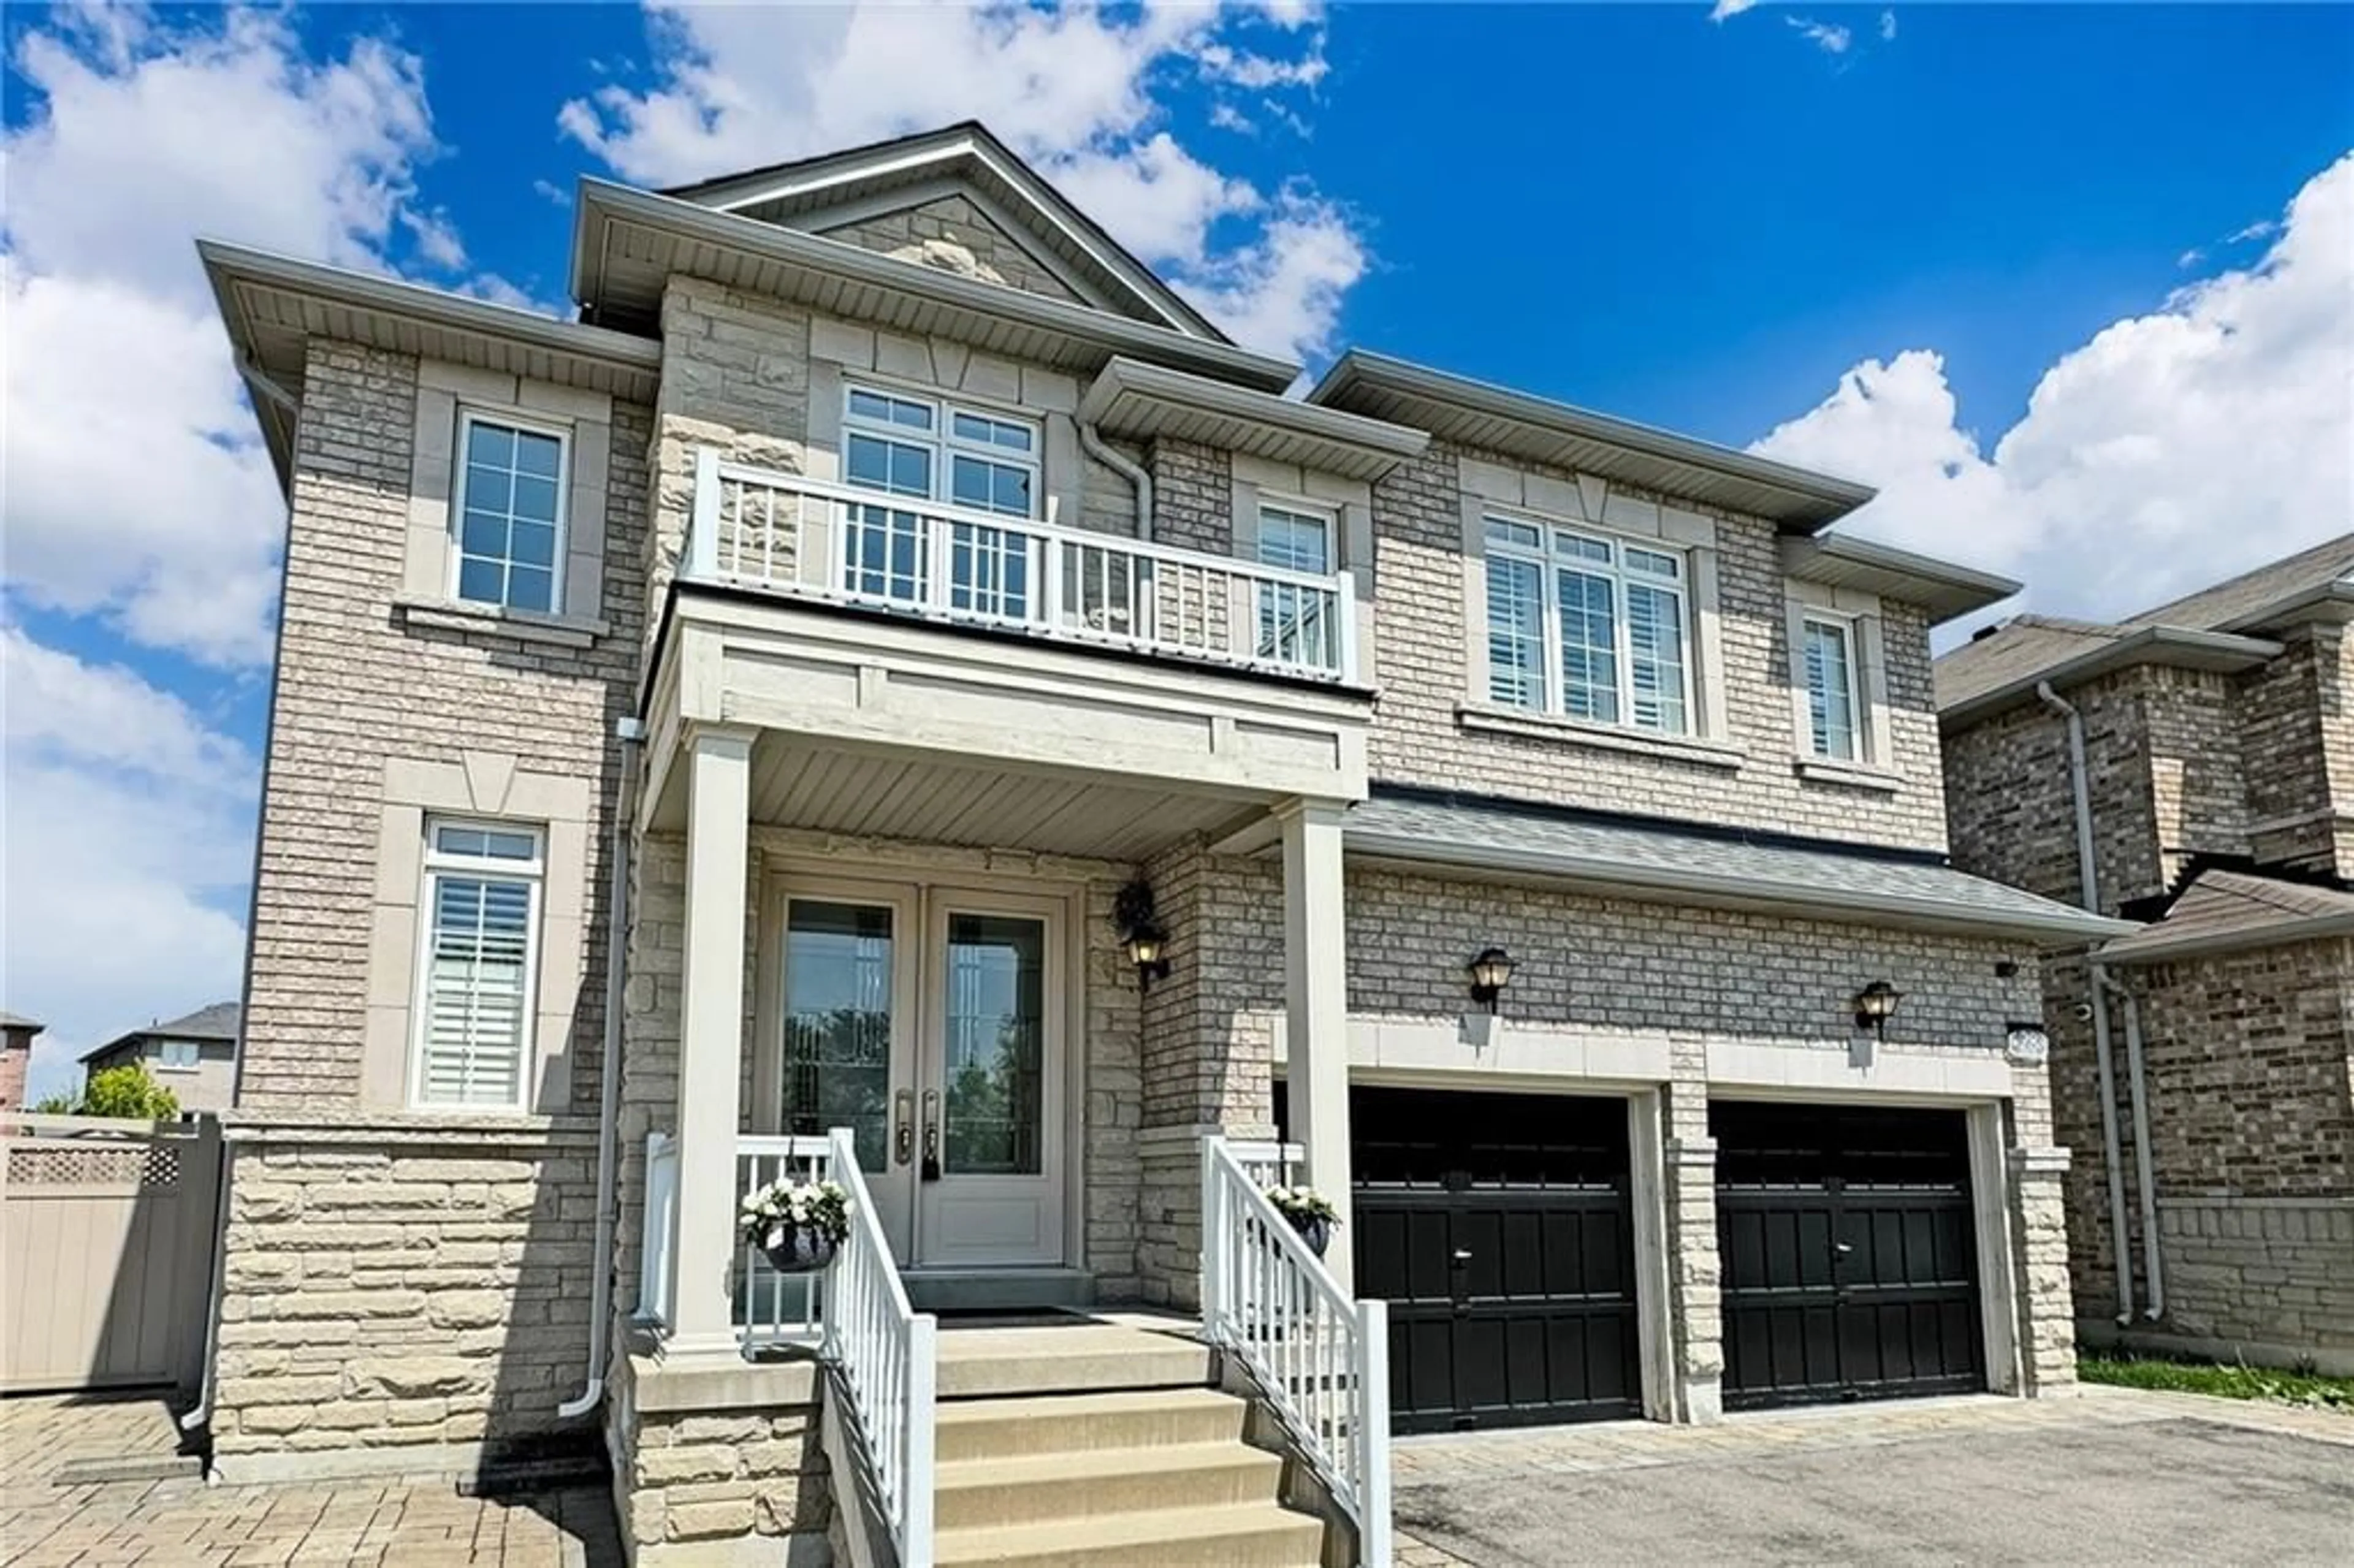 Home with brick exterior material for 28 SANDERS Dr, Markham Ontario L6B 0M3